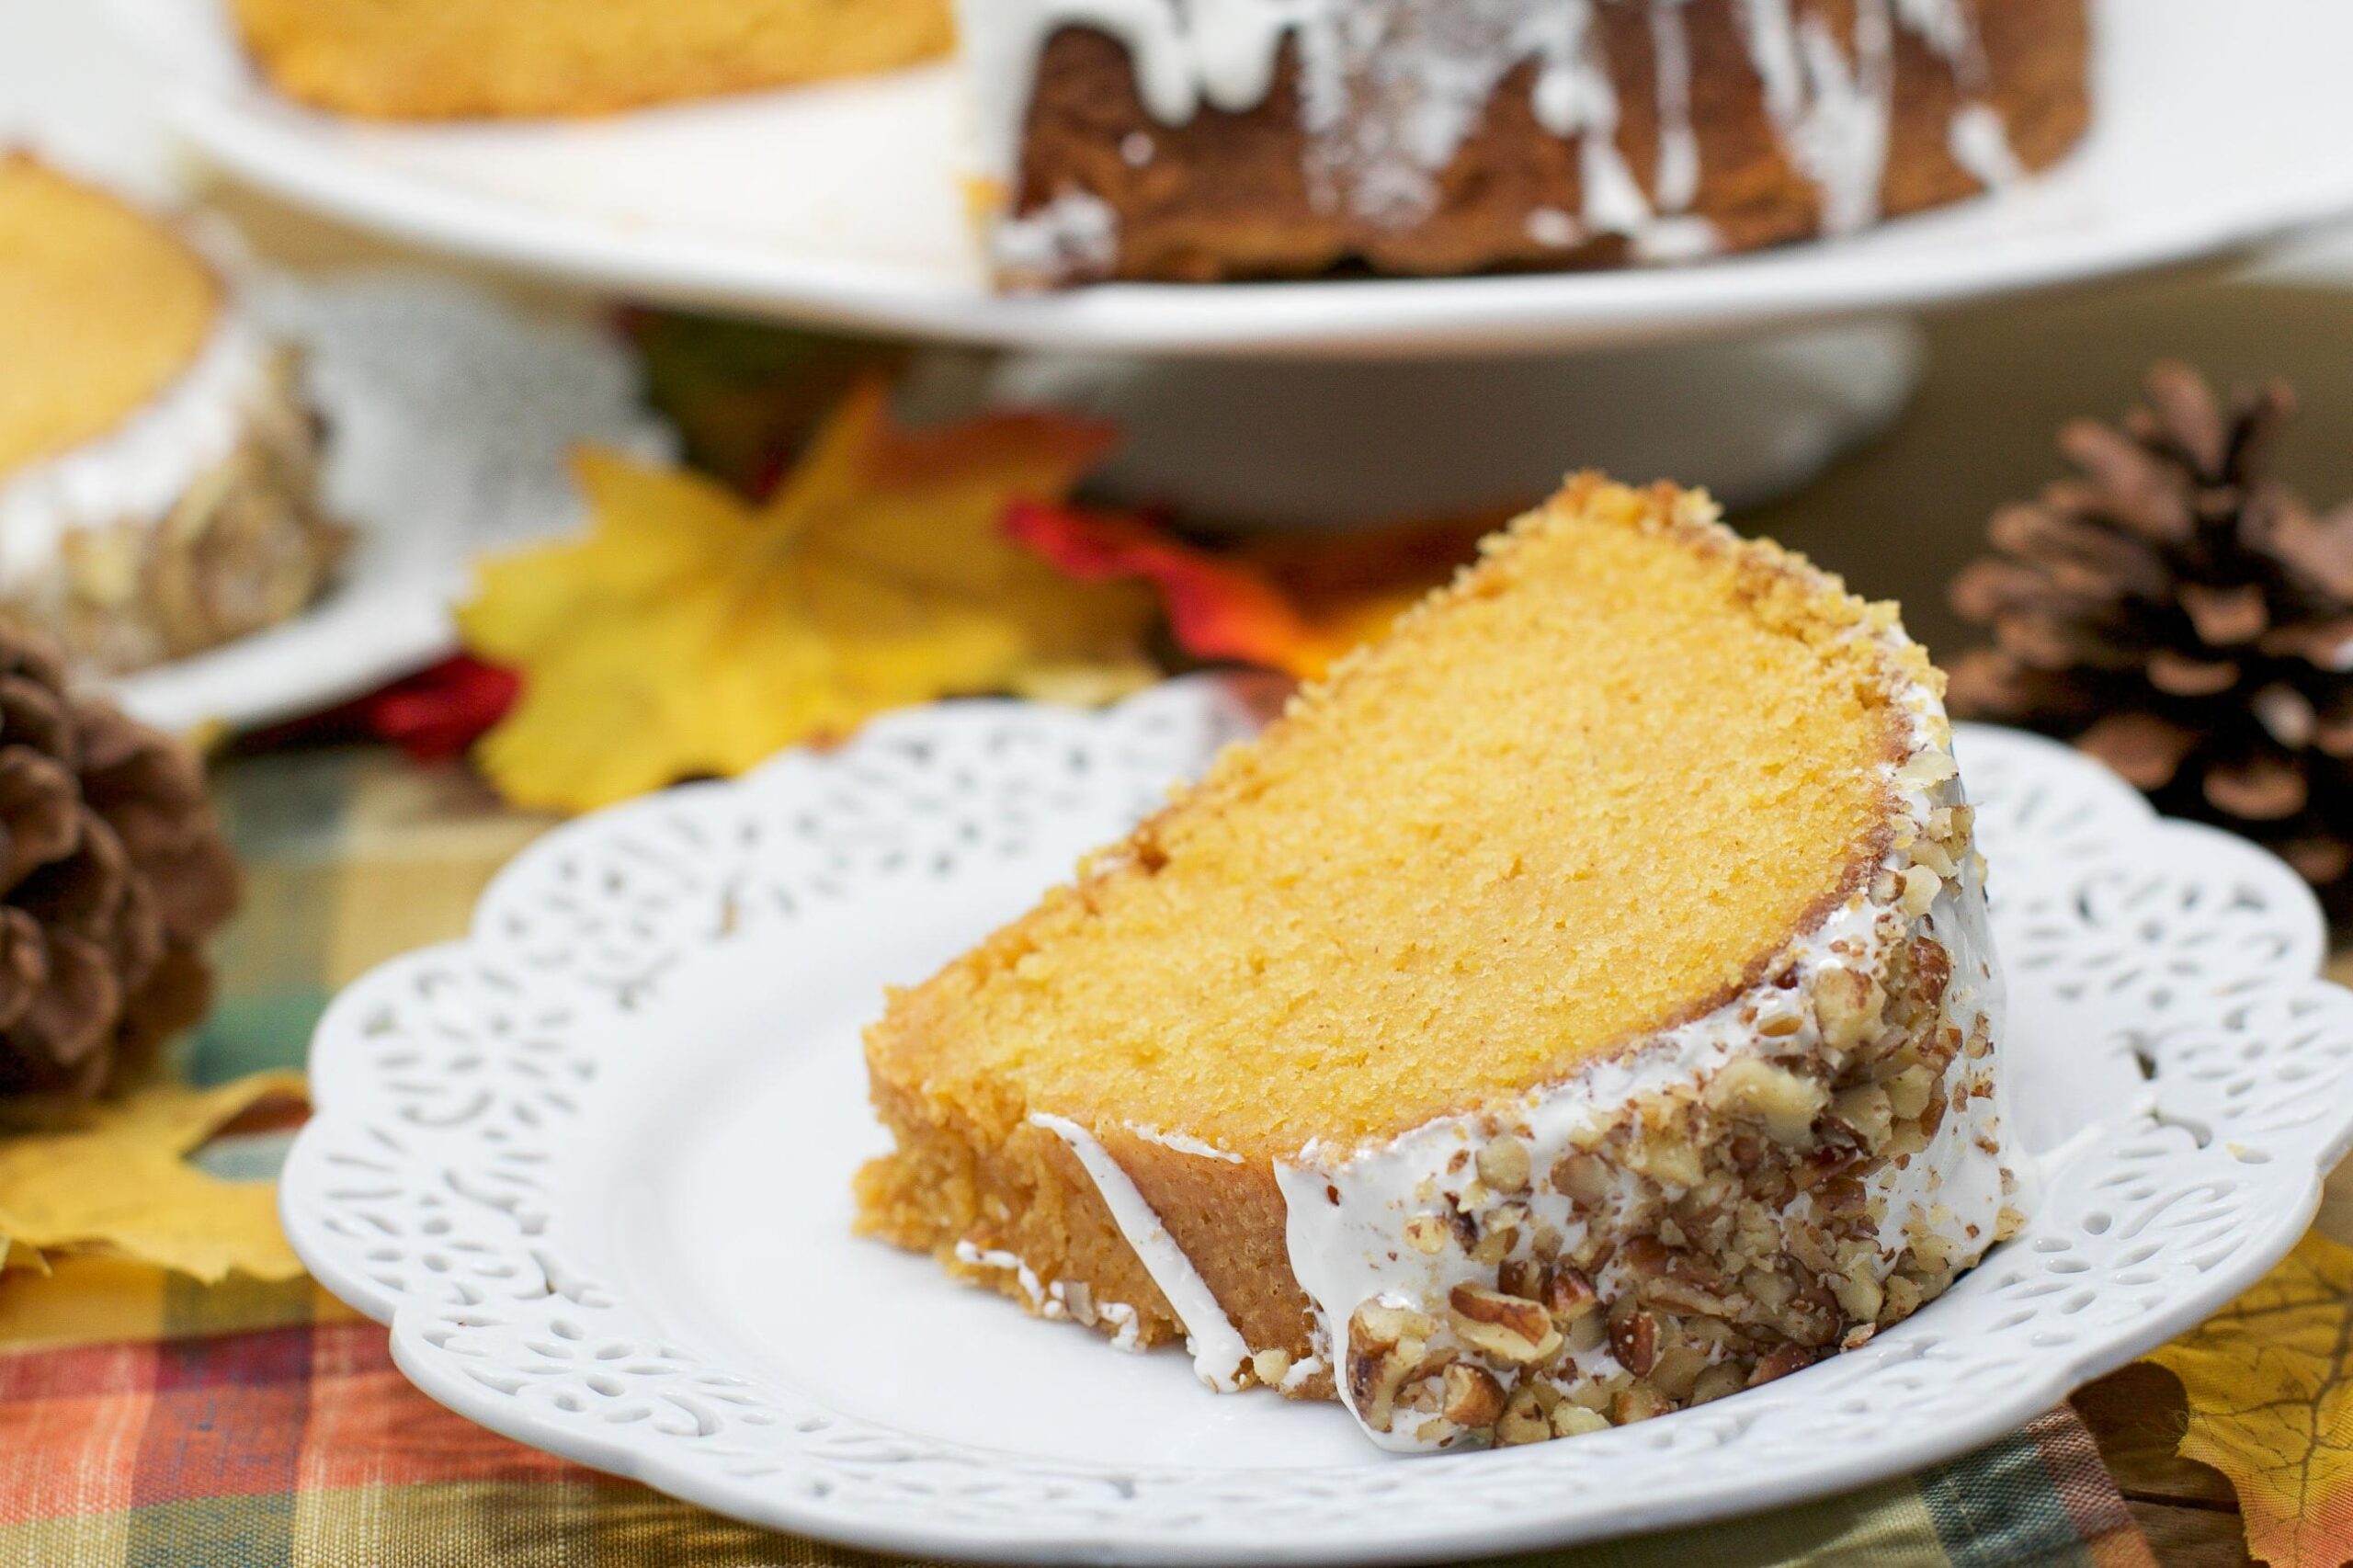  Let the aroma of this Sweet Potato Pound Cake fill your home